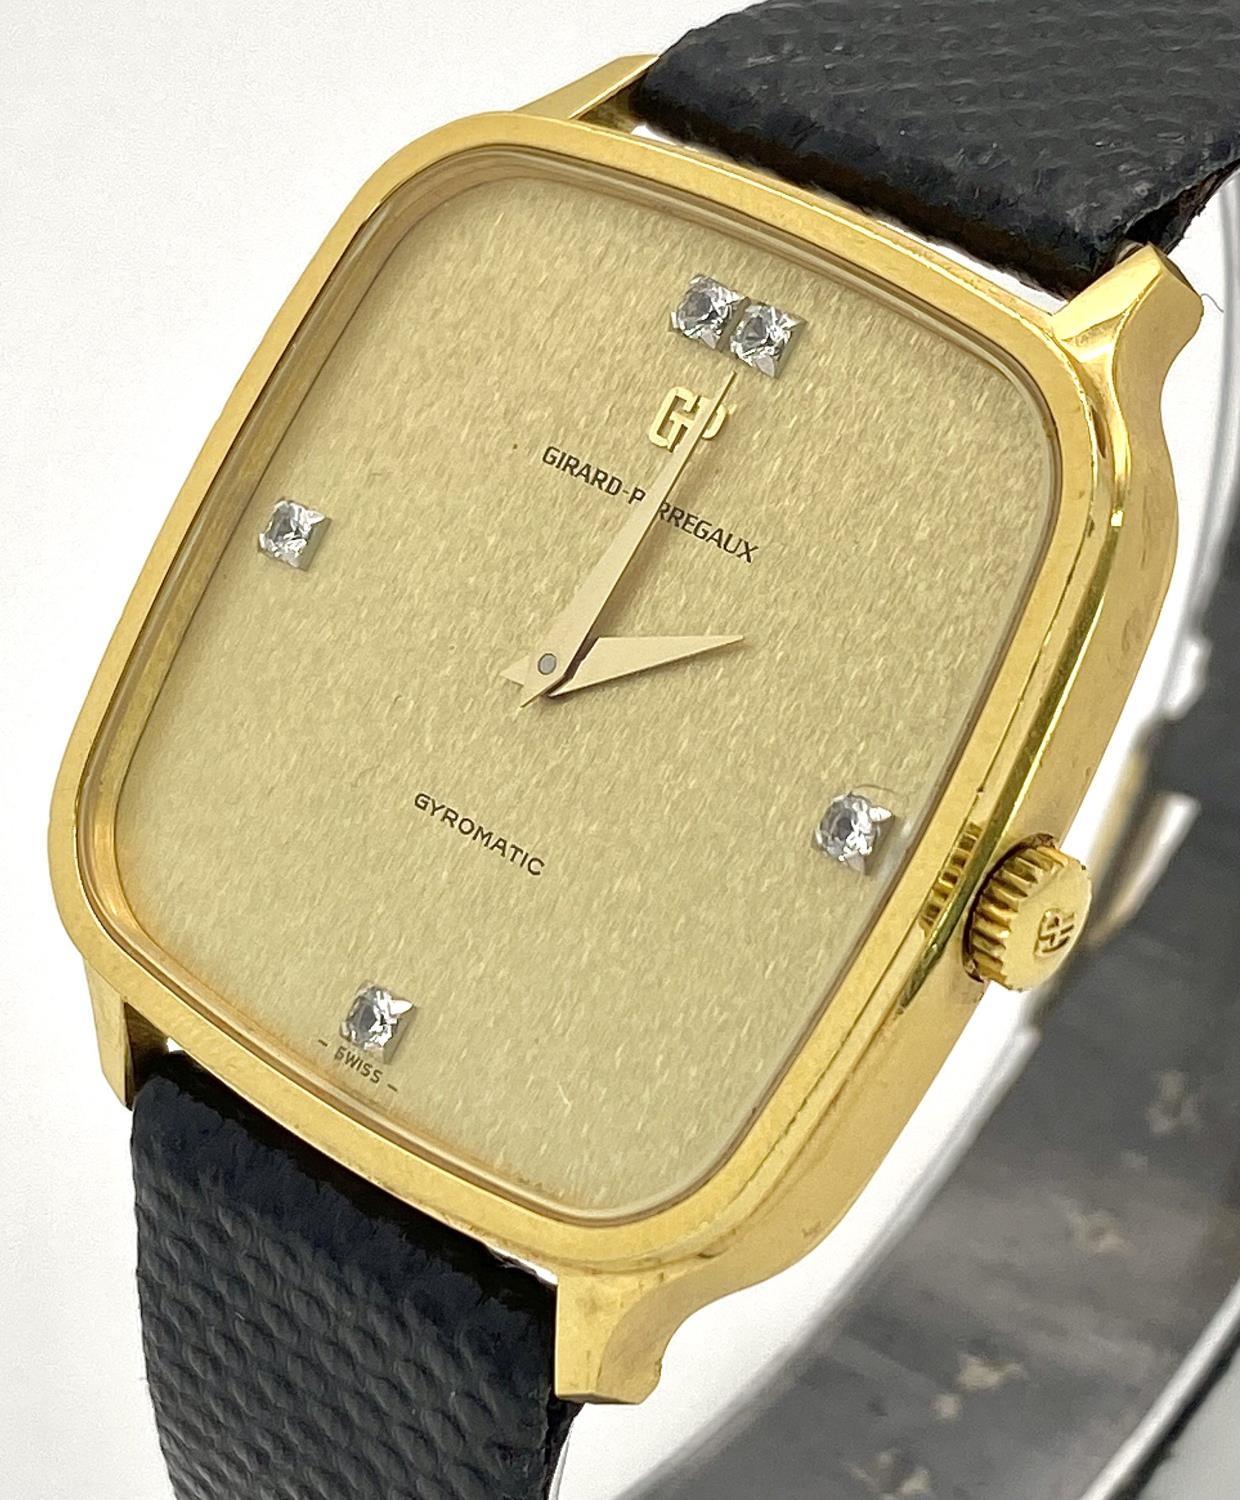 A Girard Perregaux Gold Plated Gyromatic Gents Watch. Black leather strap. Gold plated case - - Image 4 of 6